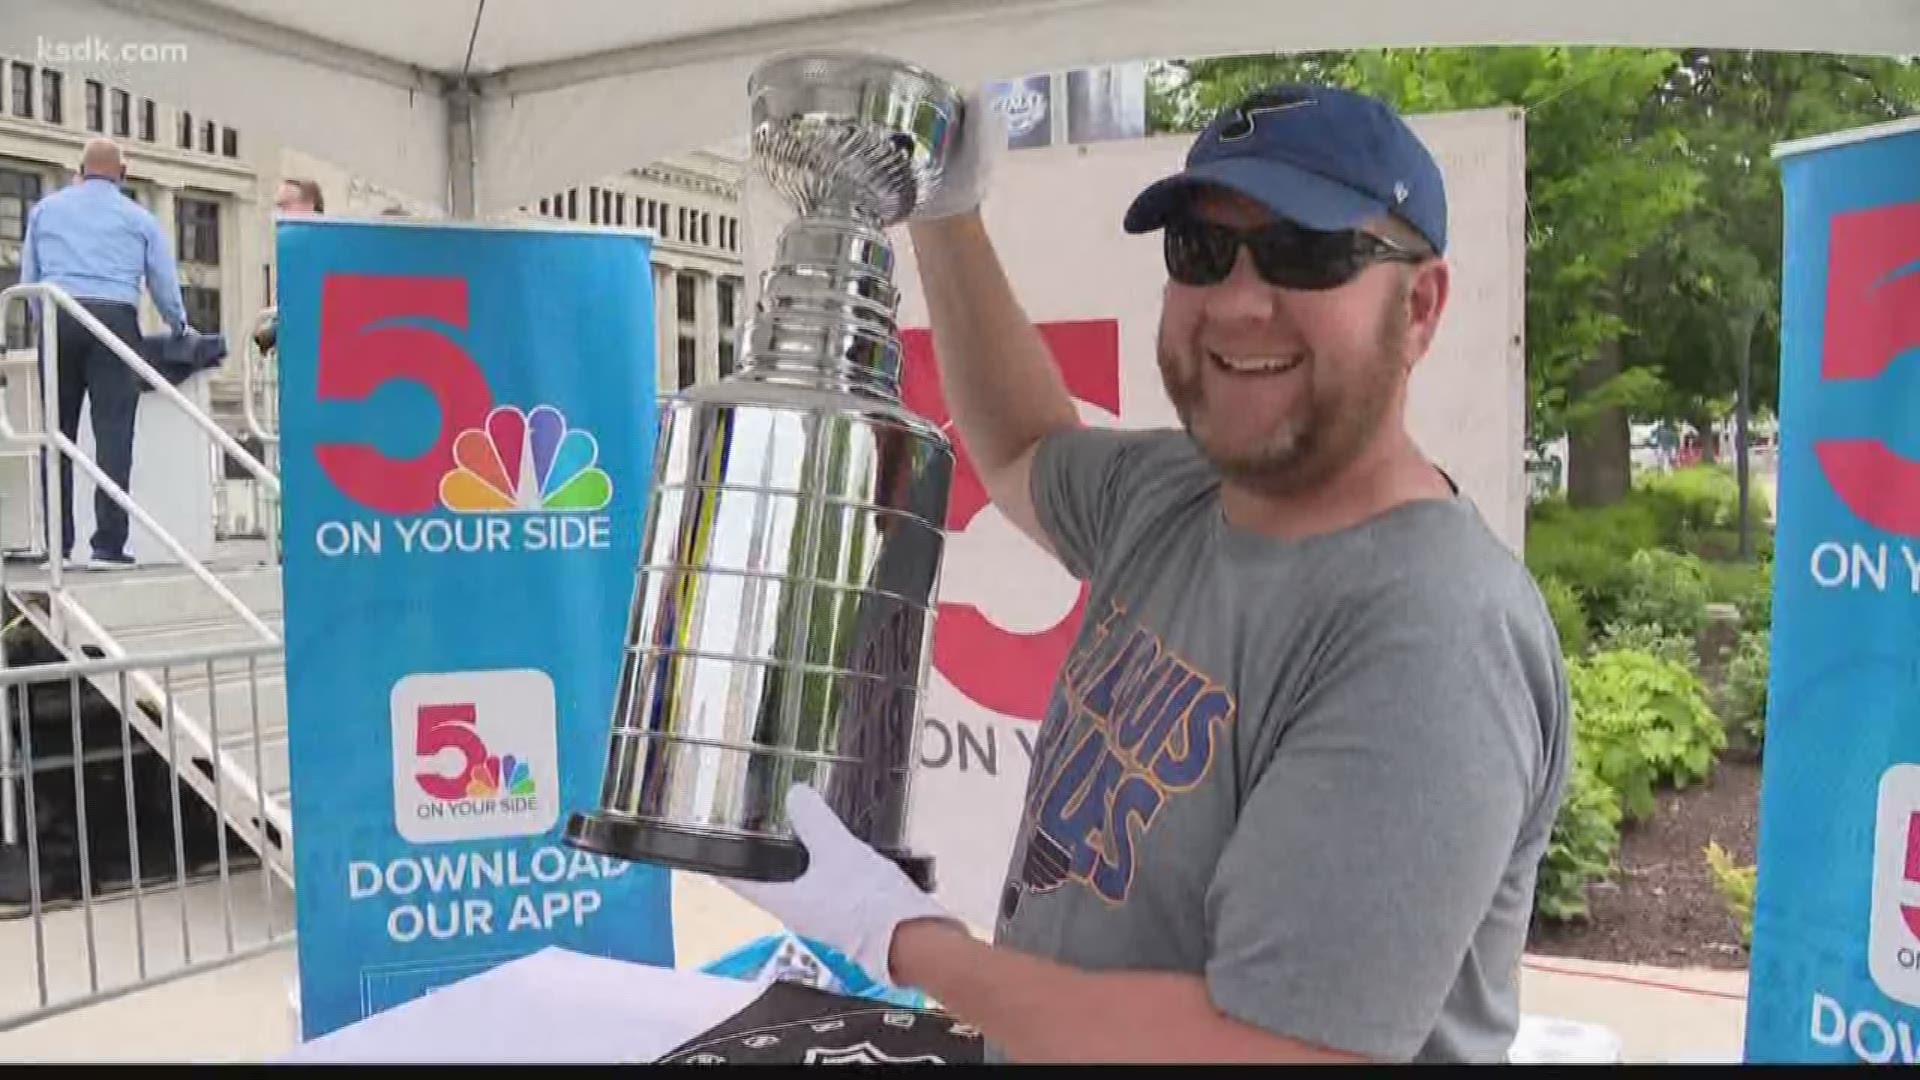 Around 25,000 fans are expected to flock to downtown St. Louis before Game 4 of the Stanley Cup Finals Monday night.